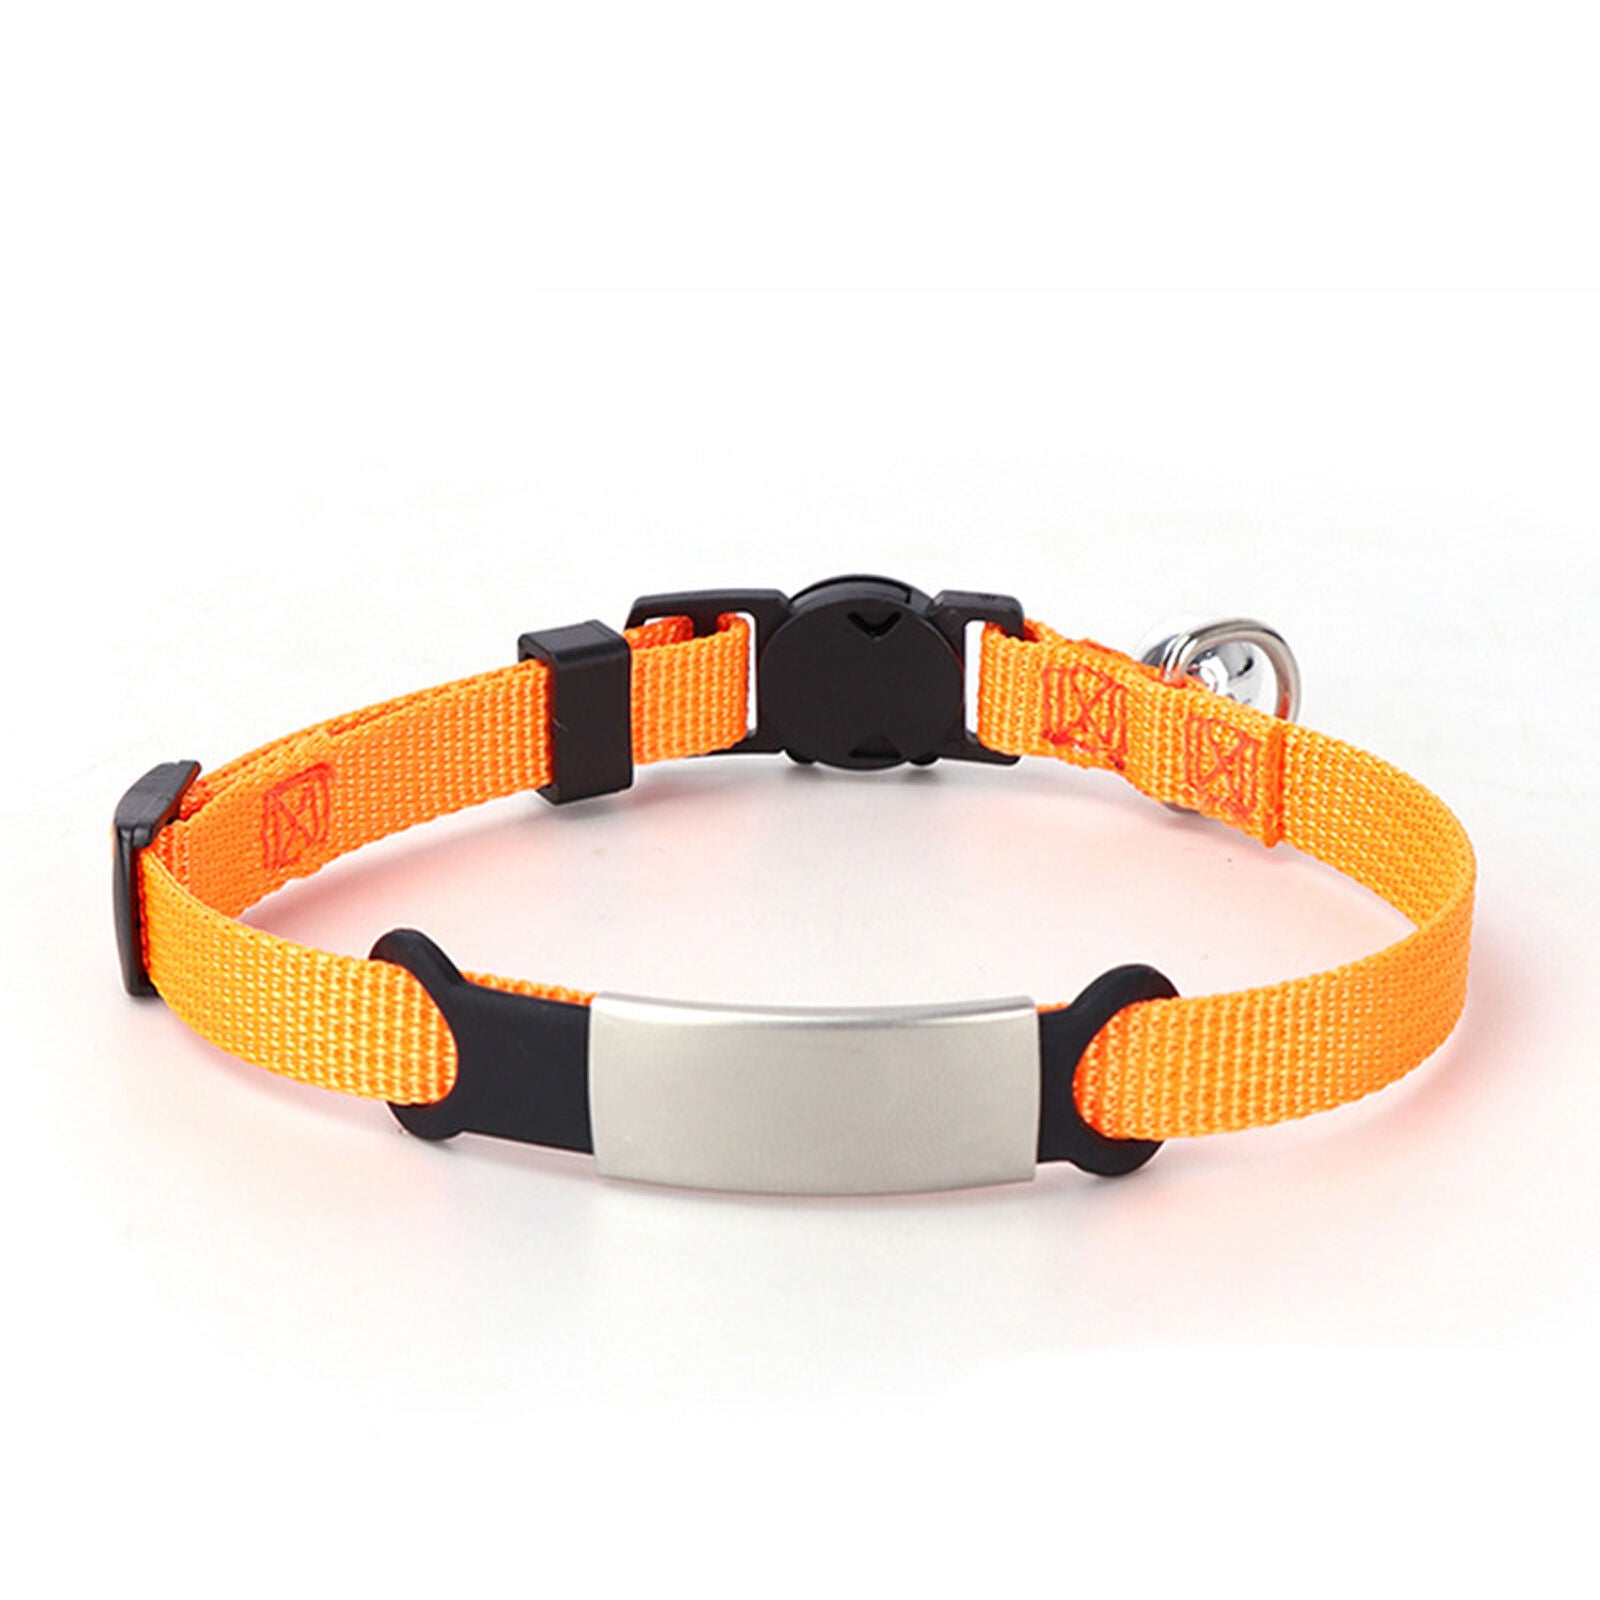 Personalised Cat Collar with Breakaway Buckle, Silent Tag Bell, 8 Bright Colors